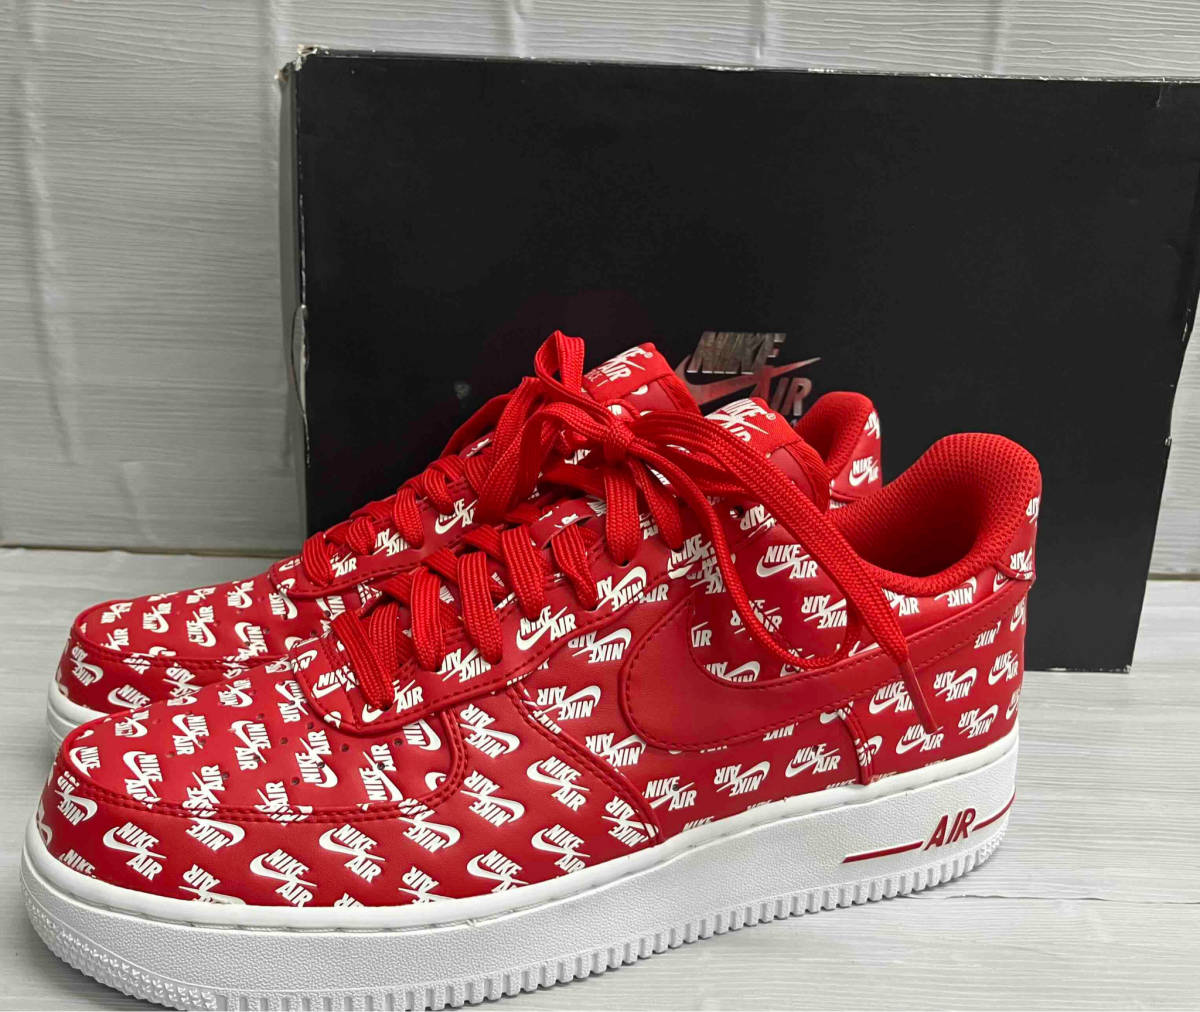 NIKE AIR FORCE Ⅰ LOW ナイキ ALL OVER LOGO RED AH8462-600 メンズ スニーカー 27cm レッド タグ付き